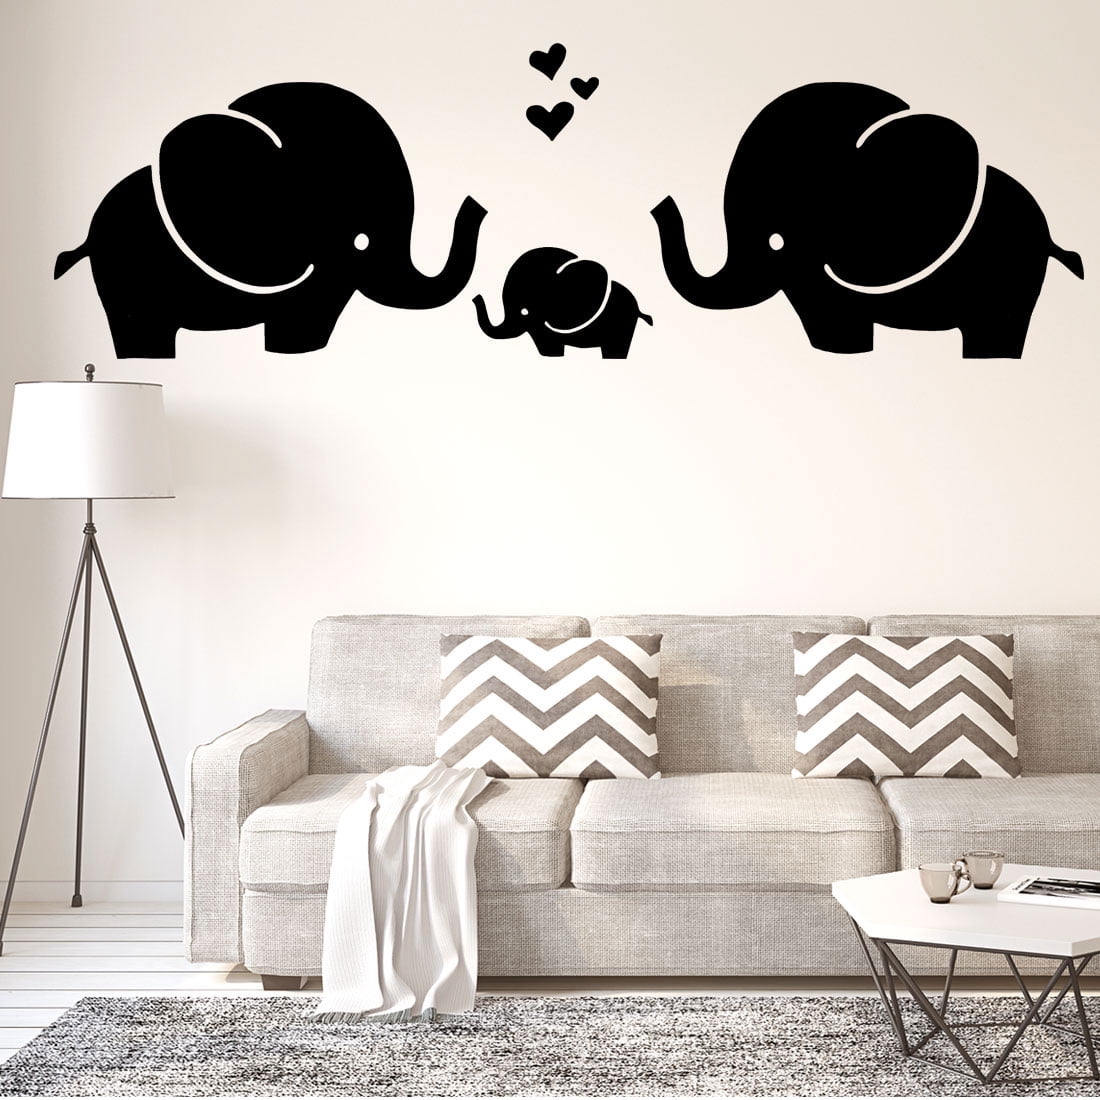 Details about   Black Elephant Pattern Wall Stickers Removable Art Decal for Living Room Bedroom